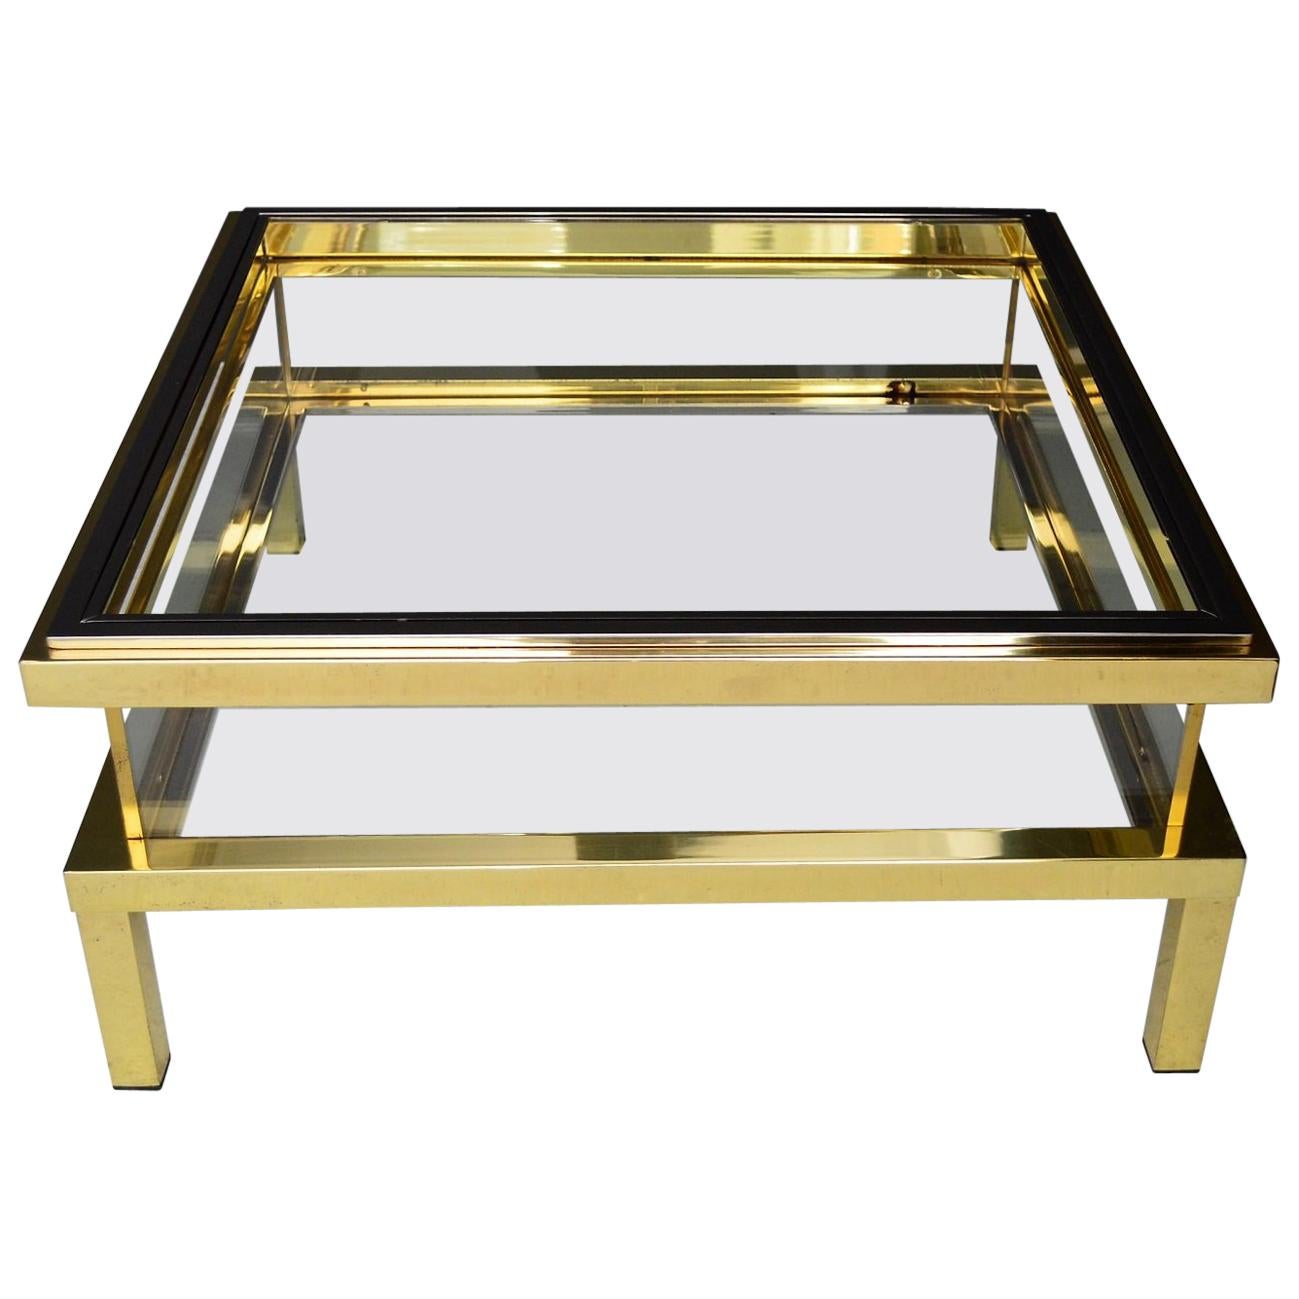 French Regency Brass Coffee Table with Slide-On Showcase by Maison Jansen, 1970s